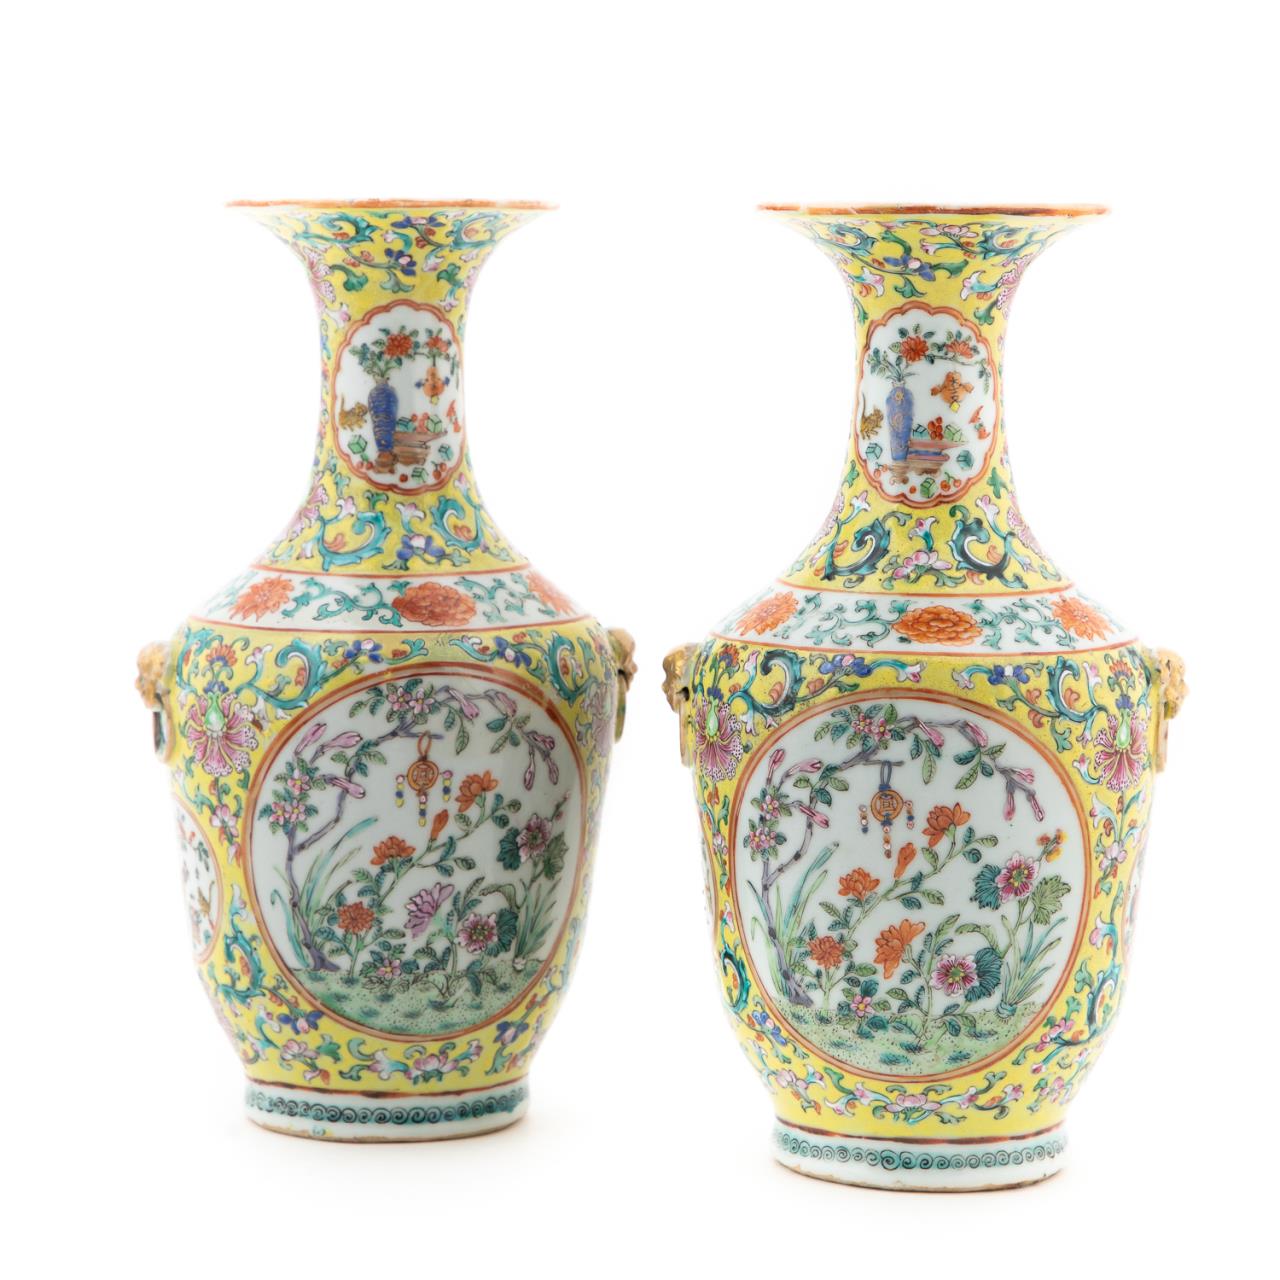 PAIR OF CHINESE YELLOW GROUND FAMILLE